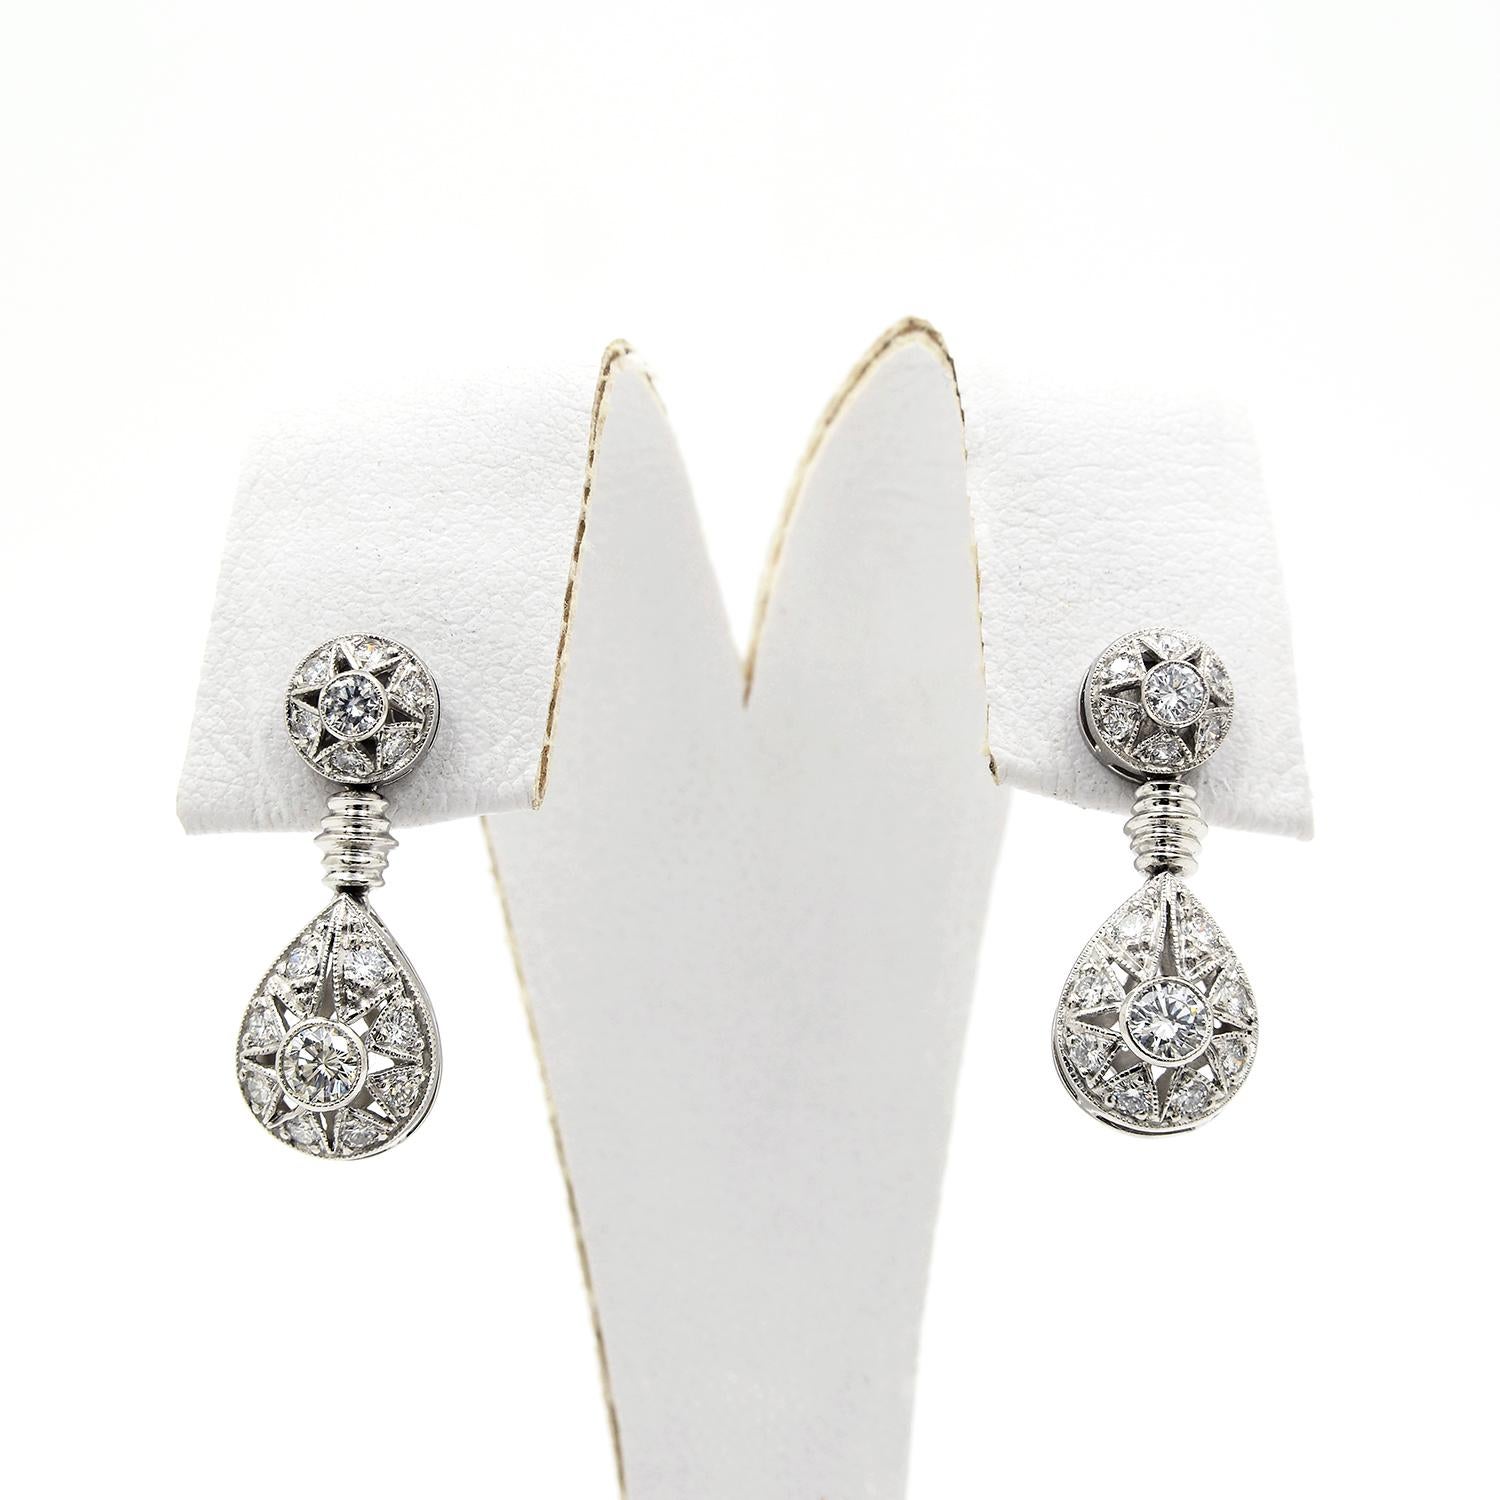 These platinum drop earrings feature a round top, bezel set with a center round brilliant cut diamond surrounded by six pave set diamonds. The drops feature a grooved bar and teardrop shape that is set with eight round brilliant cut diamonds in